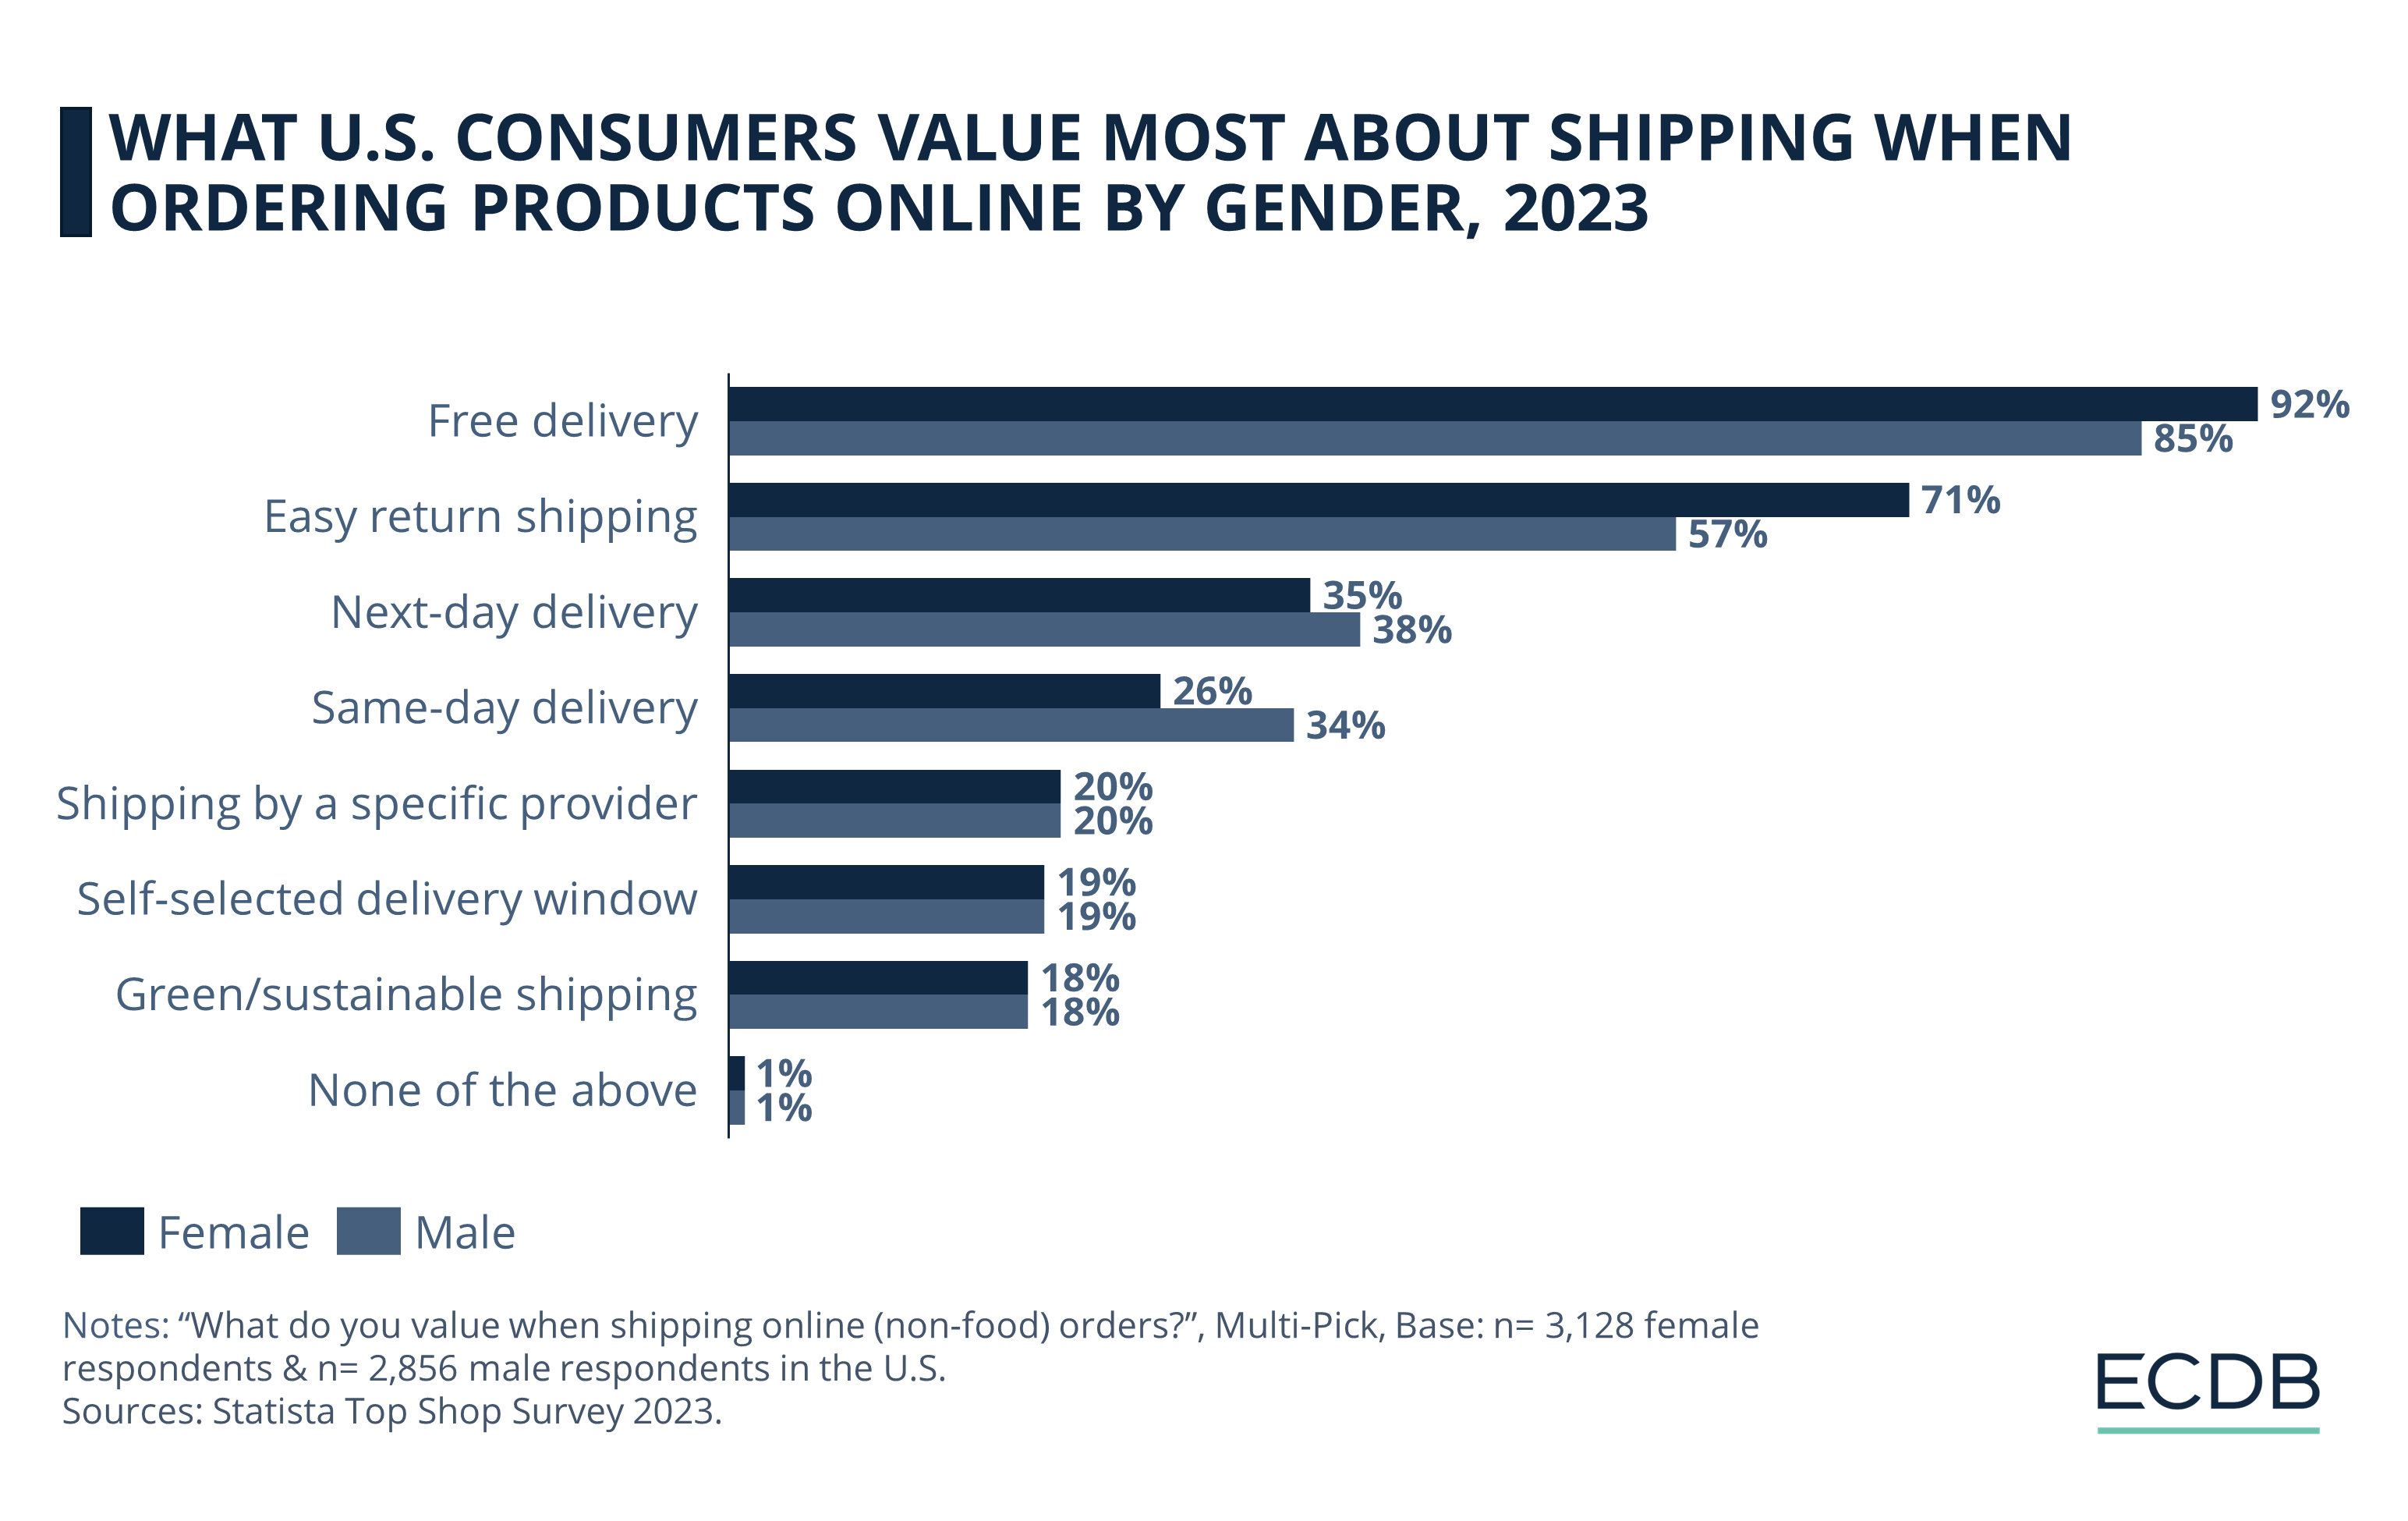 What U.S. Consumers Value About Shipping When Ordering Products Online by Gender, 2023